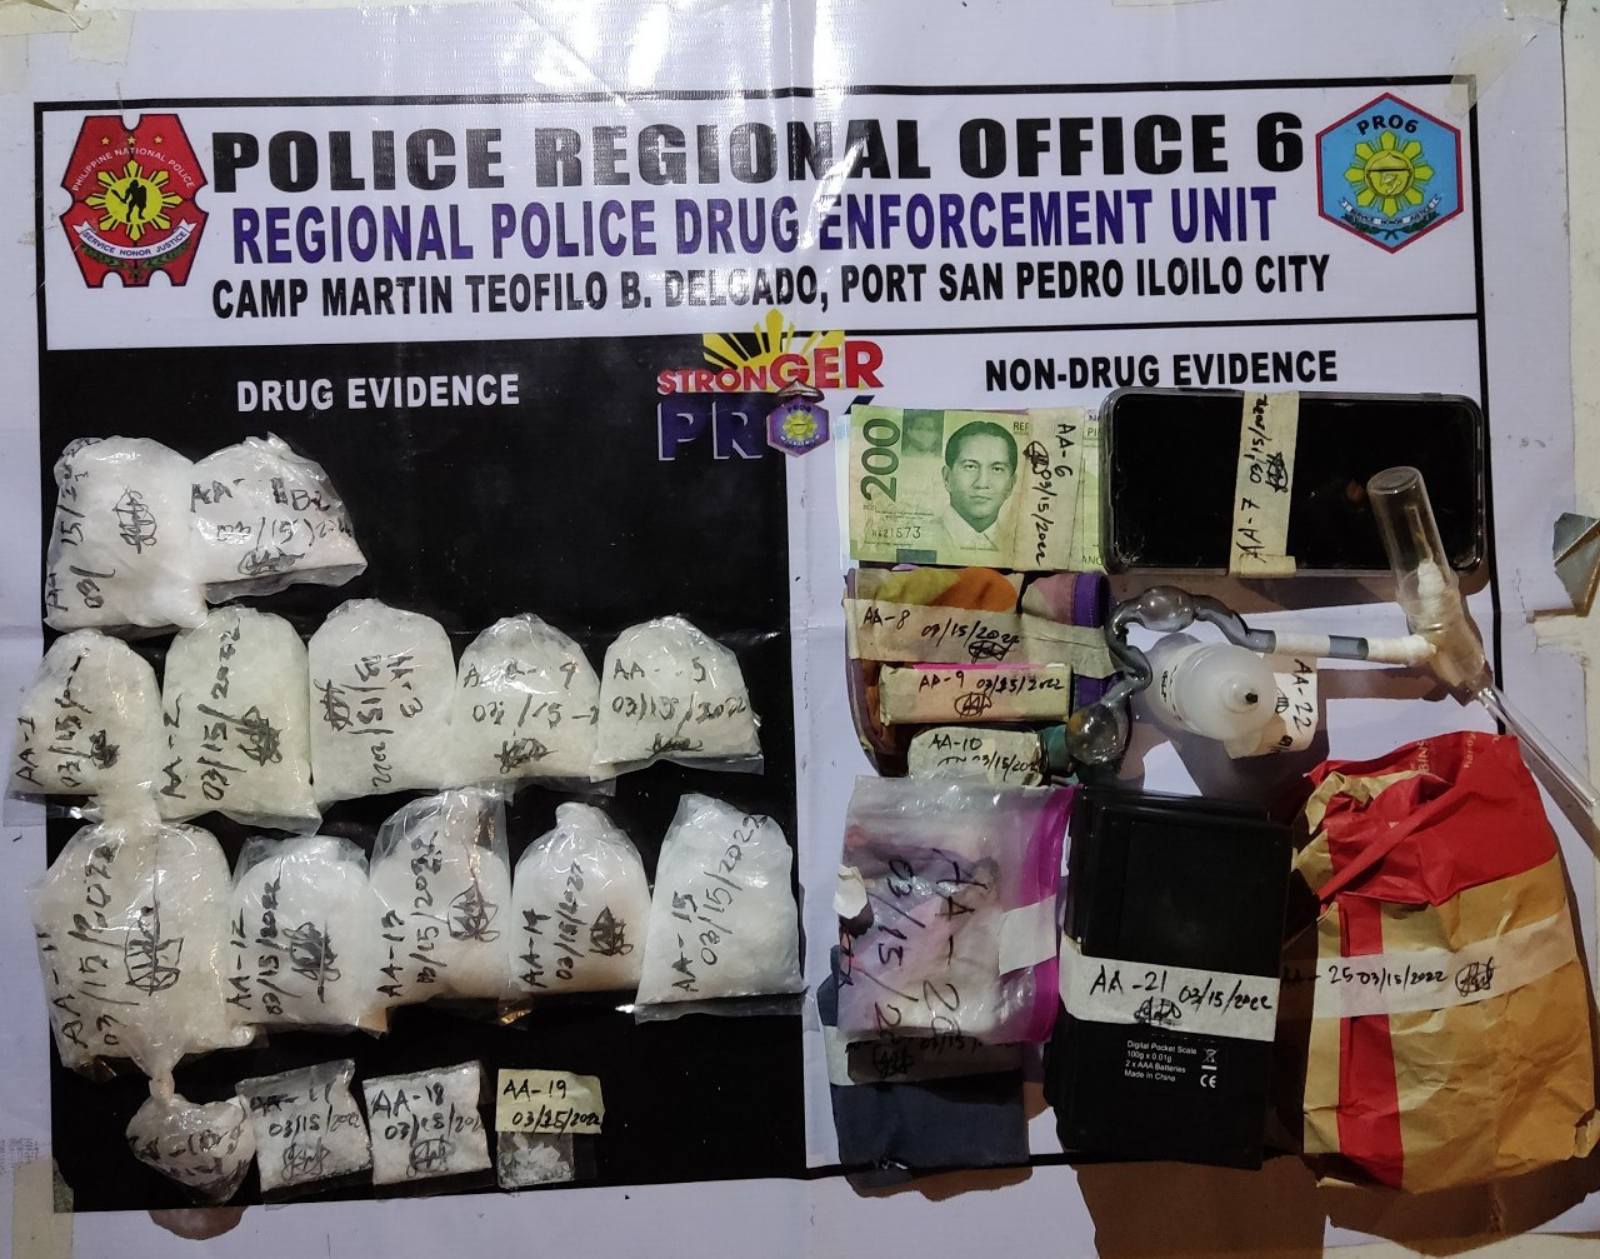 Anti-narcotics officers in Roxas City, Capiz, detained a high-value drug suspect resulting in the seizure of P4 million worth of crystal meth, colloquially known as "shabu." PHOTO FROM PNP-PIO